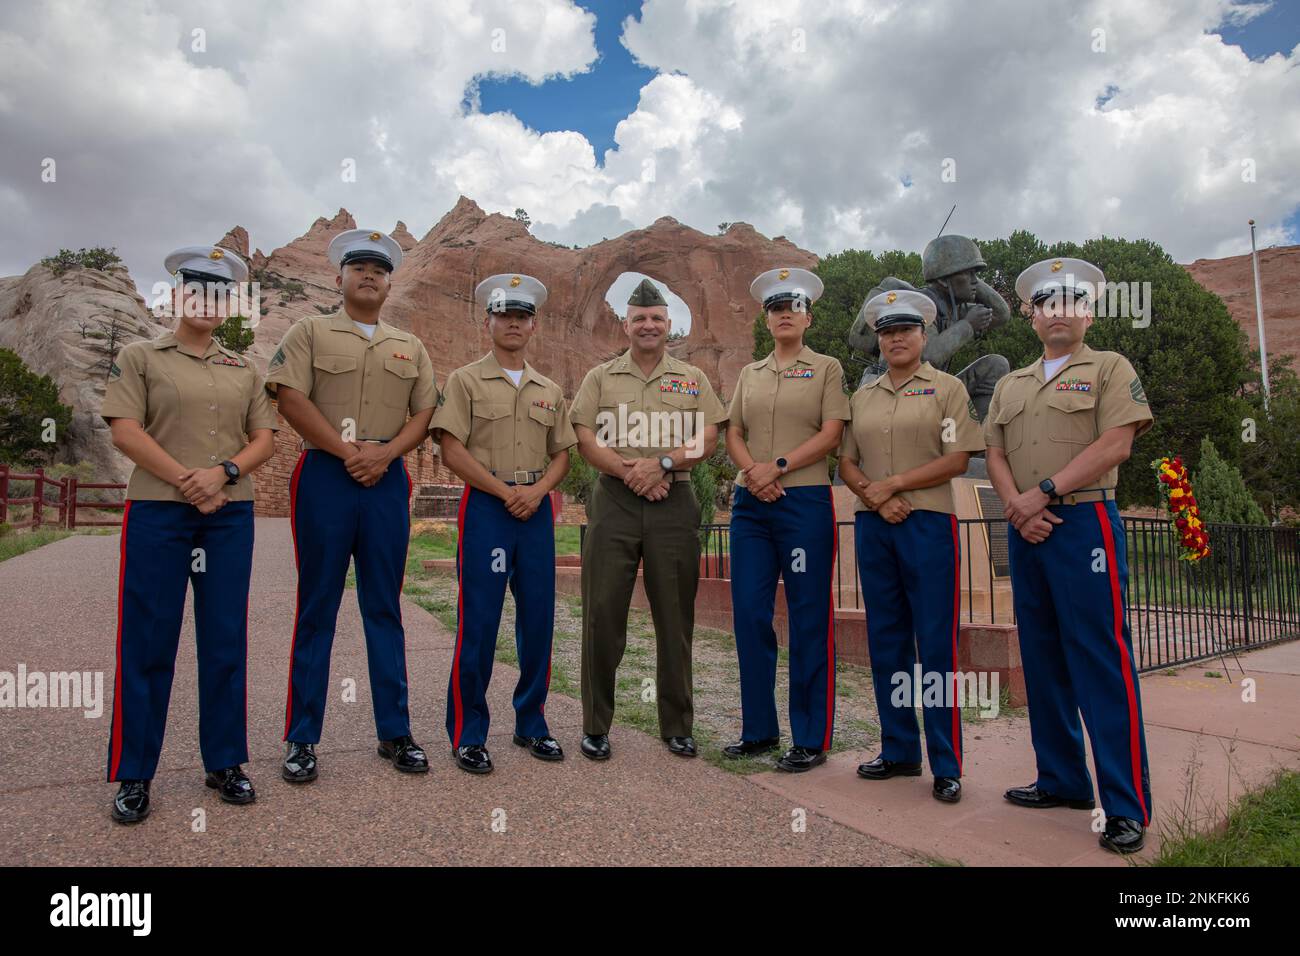 Lt. Gen. David G. Bellon, Commander of Marine Forces Reserve and Marine Forces South, poses for a photo with six Navajo Nation Marines at Window Rock, Ariz., N.M., Aug. 14, 2022. The Marines met to discuss their participation in a ceremony for the National Navajo Code Talkers Day, which has been observed every Aug. 14 since 1982. The Marines had never met each other before, but quickly found common ground through their shared military service and Navajo heritage. Stock Photo